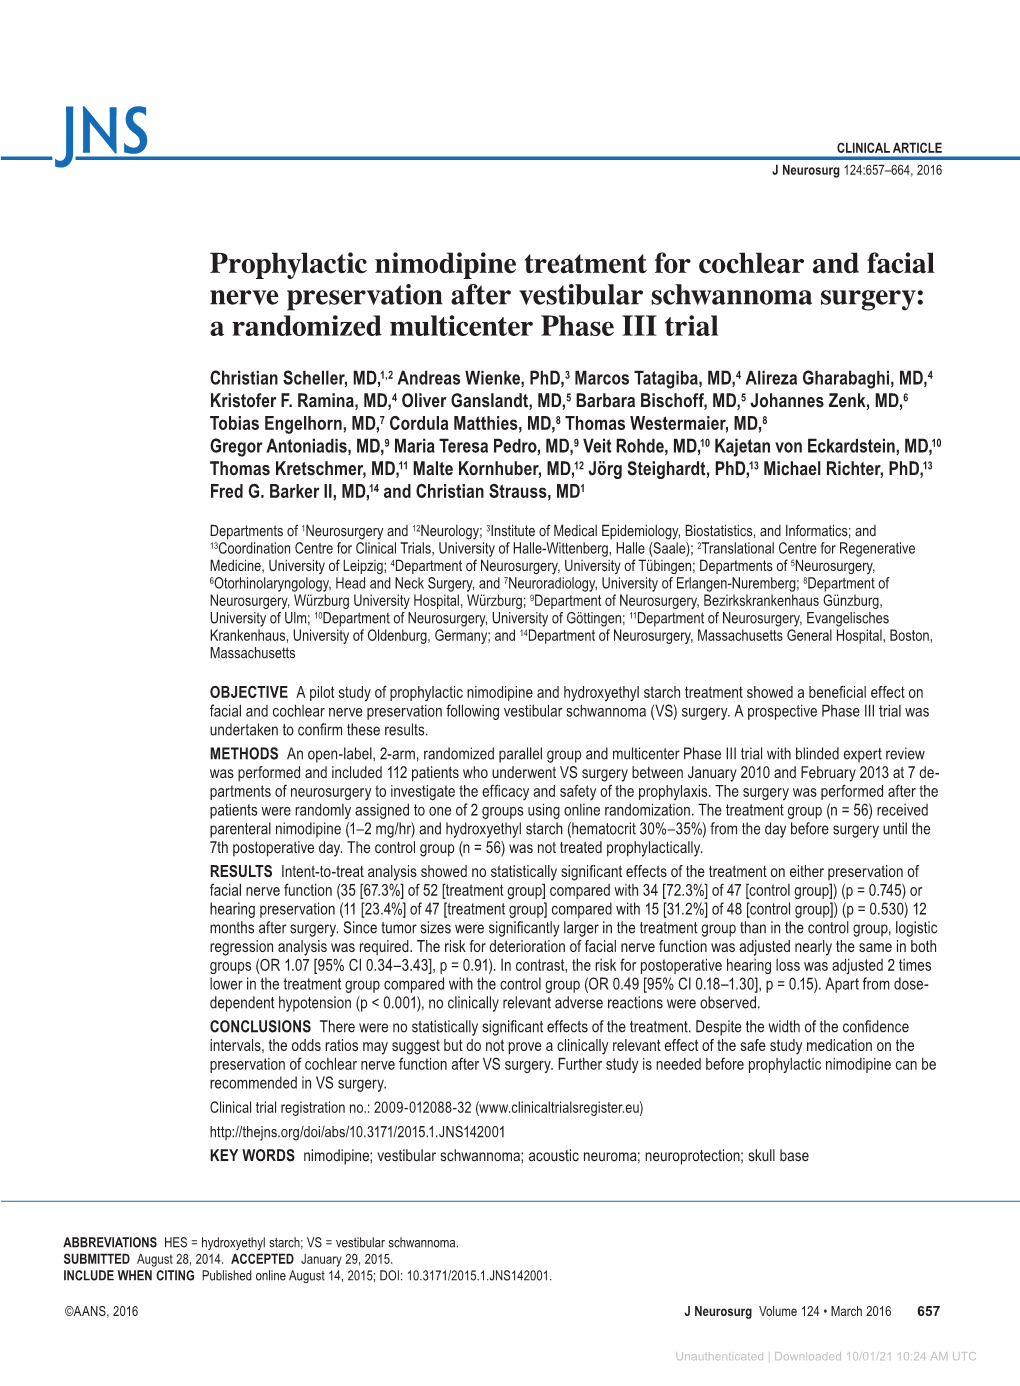 Prophylactic Nimodipine Treatment for Cochlear and Facial Nerve Preservation After Vestibular Schwannoma Surgery: a Randomized Multicenter Phase III Trial